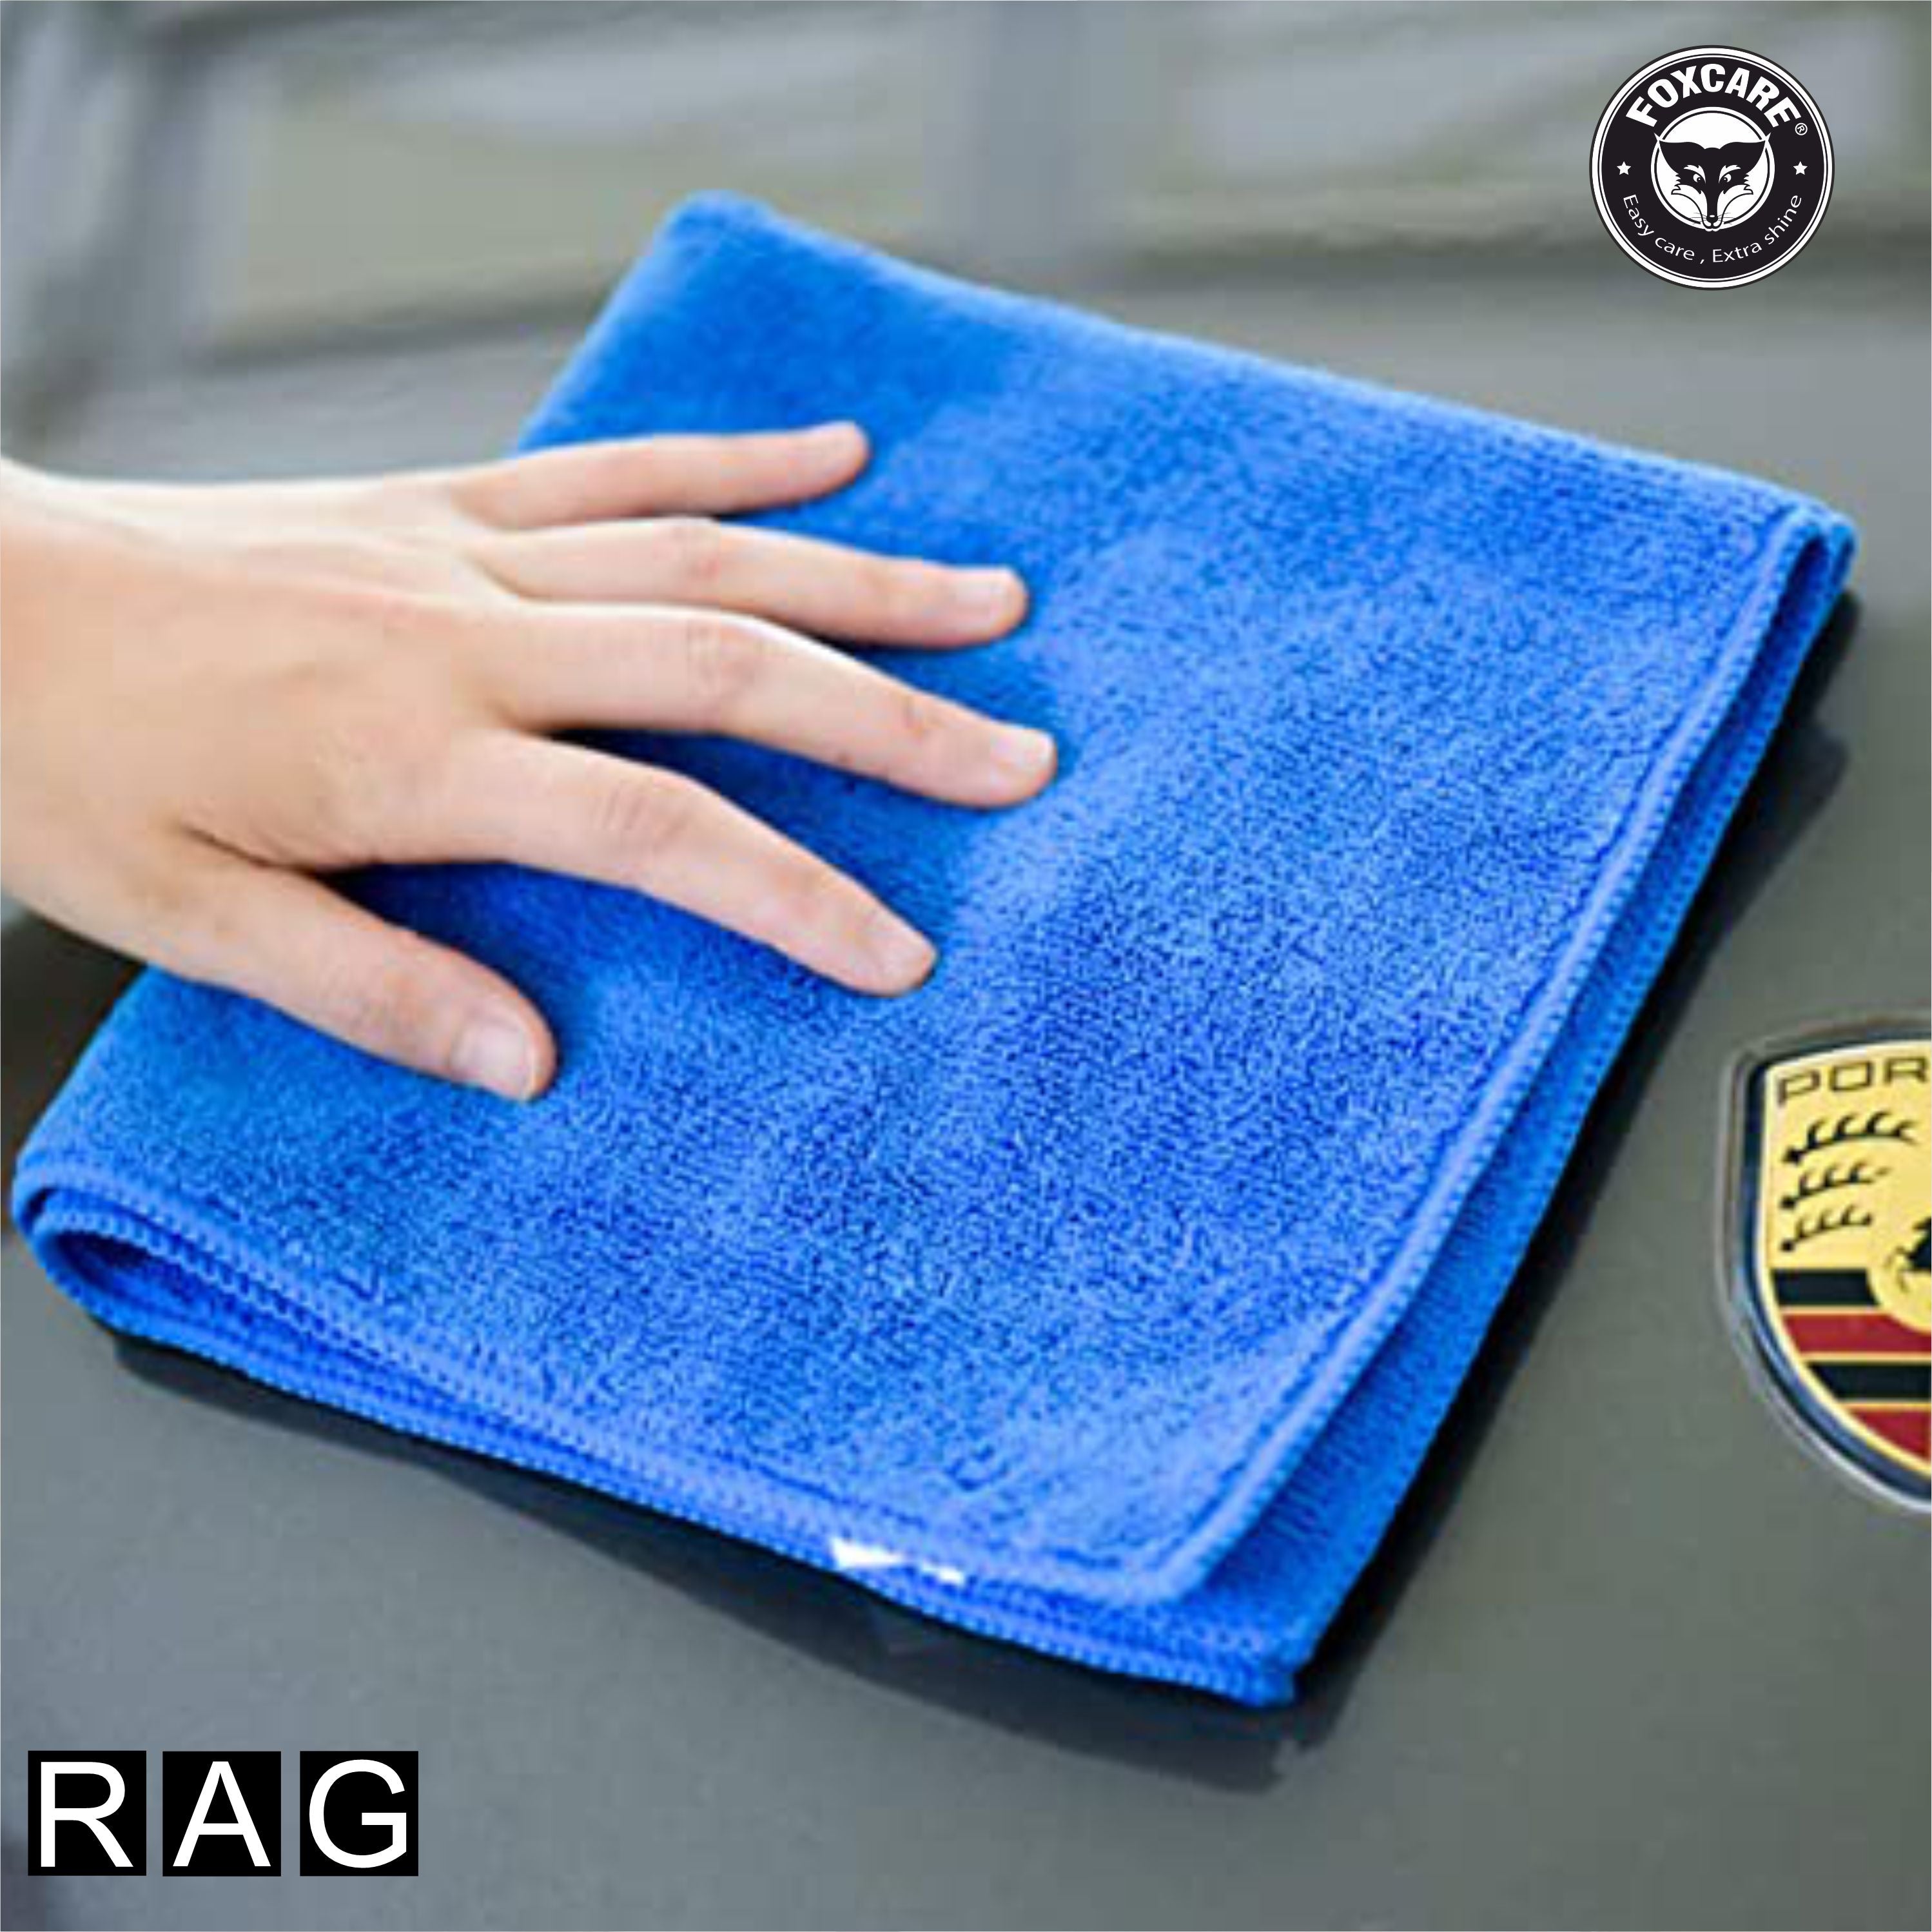 Foxcare Rag Blue Microfiber Cloth - 40x40 cms - 350 GSM - Thick Lint & Streak-Free Multipurpose Cloths -Automotive Microfibre Towels for Car Bike Cleaning Polishing Washing & Detailing